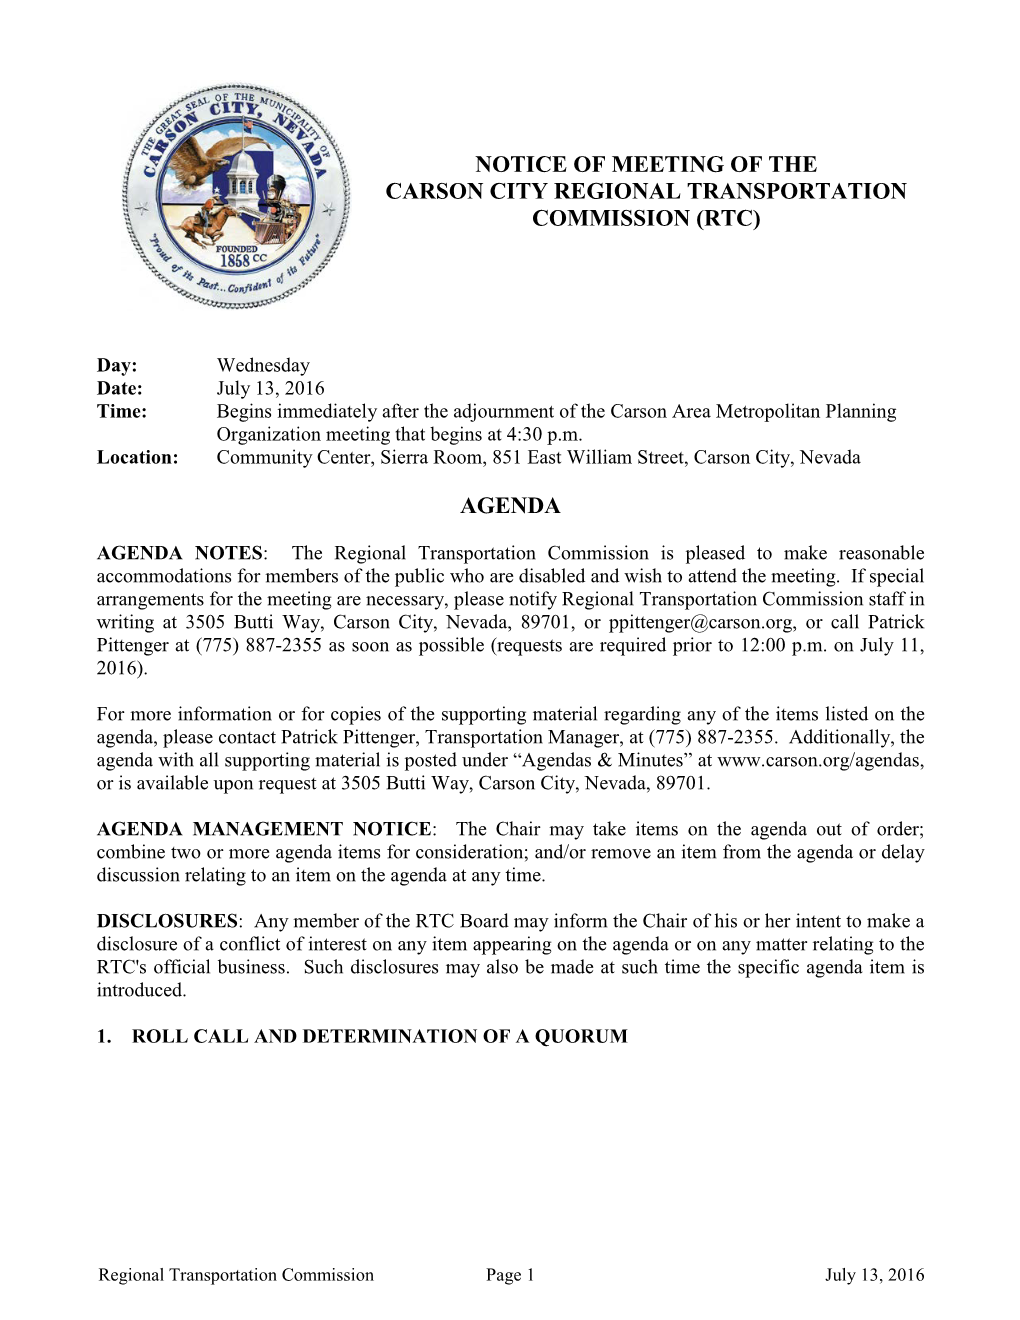 Notice of Meeting of the Carson City Regional Transportation Commission (Rtc)